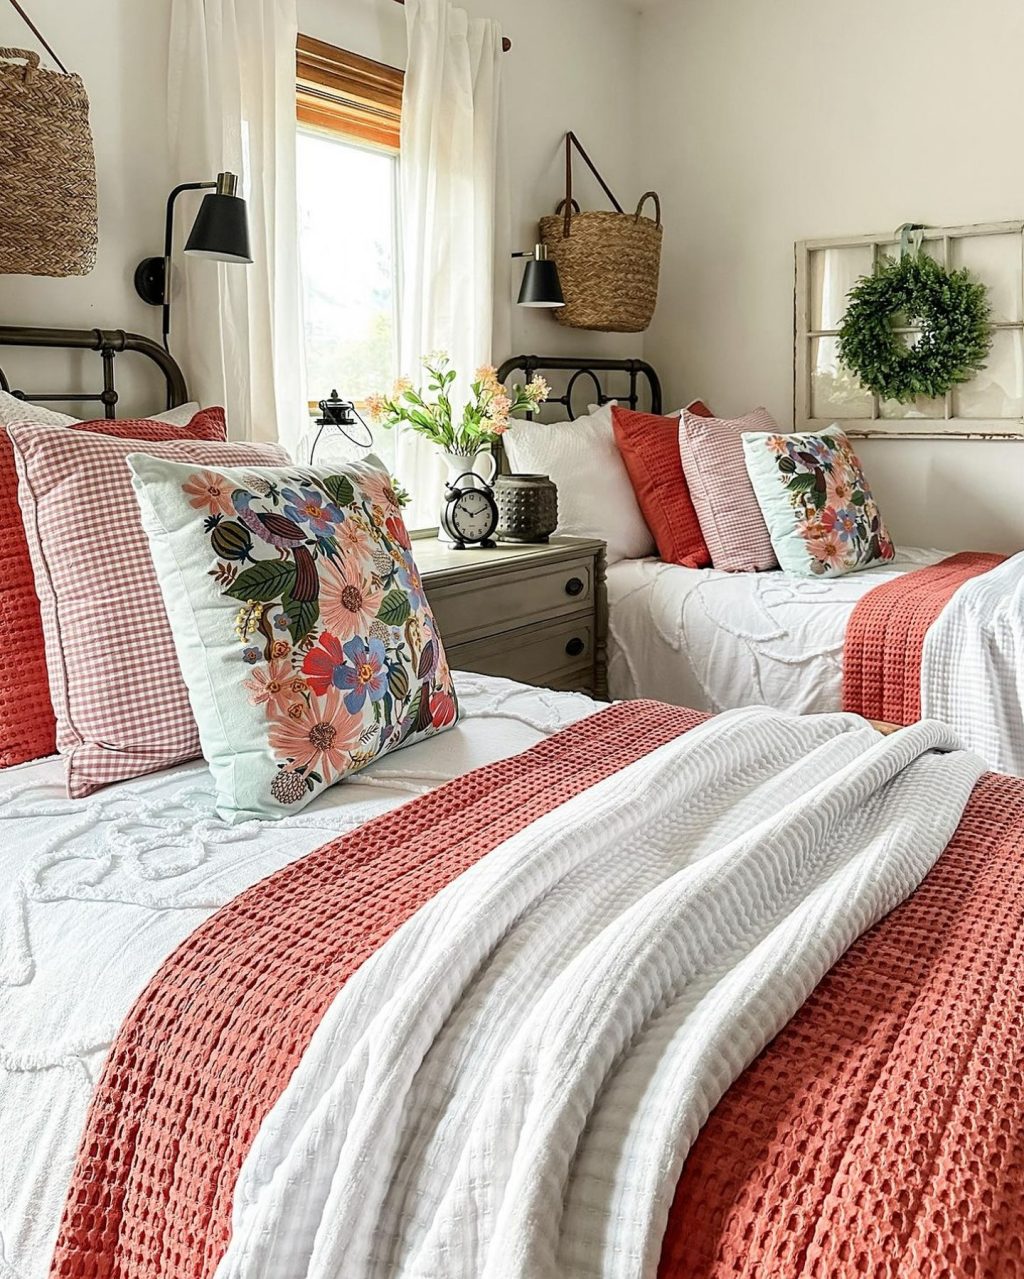 Rusty red bedding with floral pillows